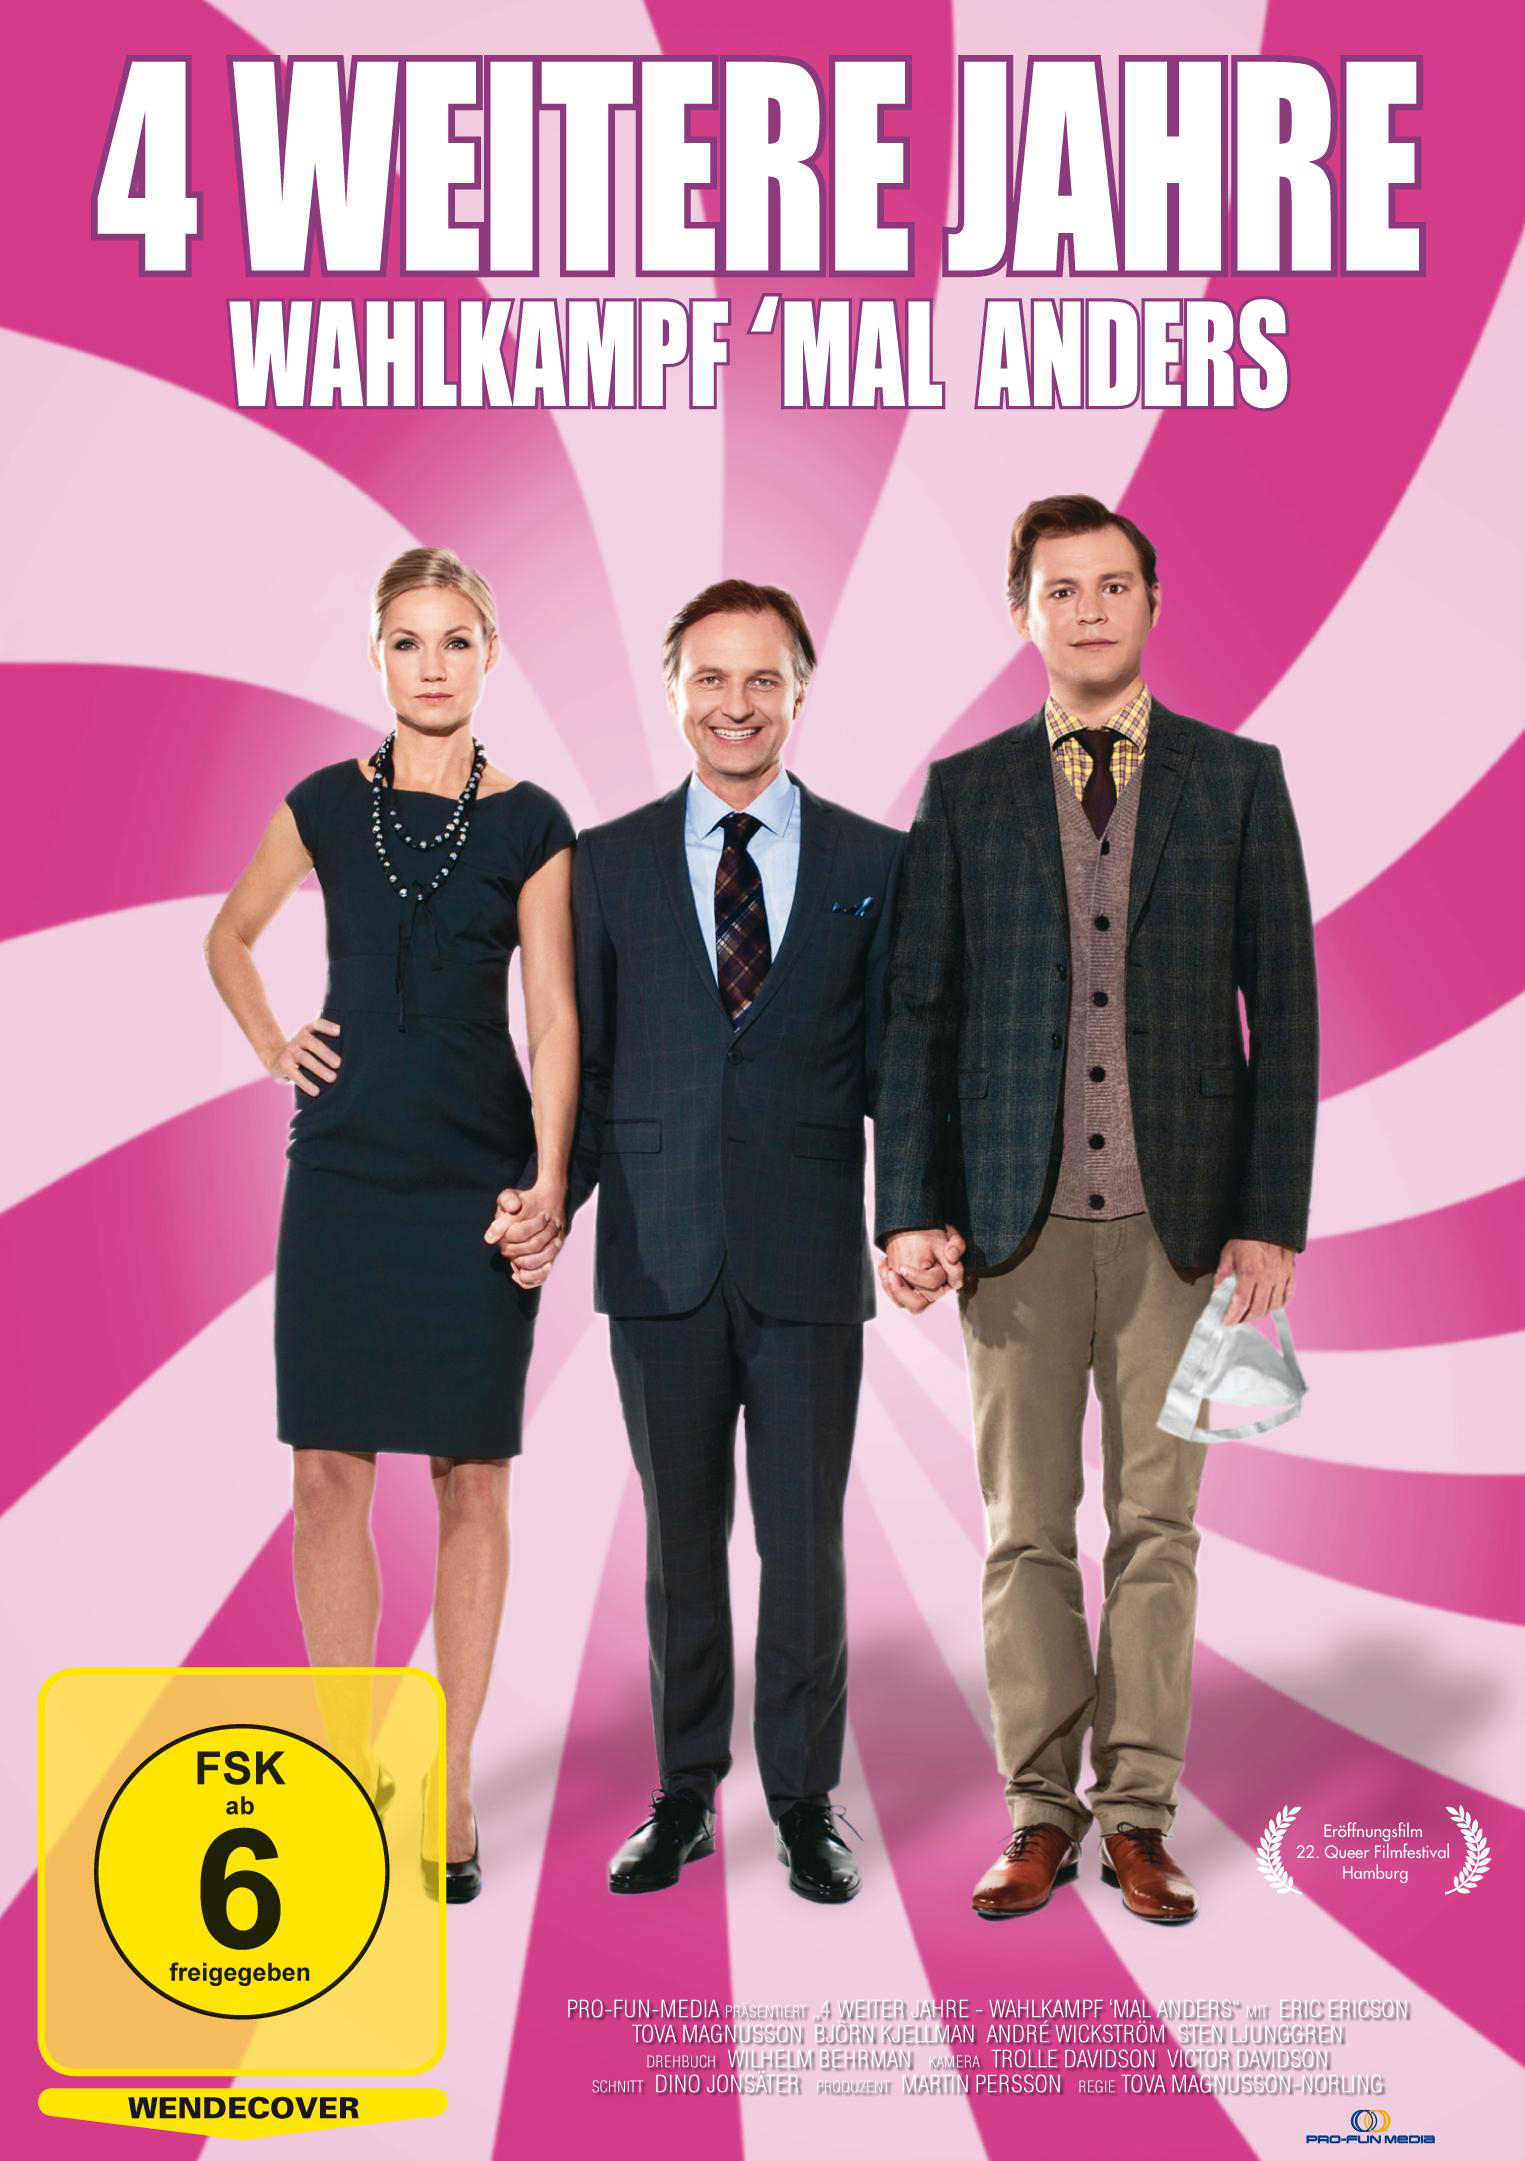 Jahre anders weitere - DVD 4 Wahlkampf \'mal